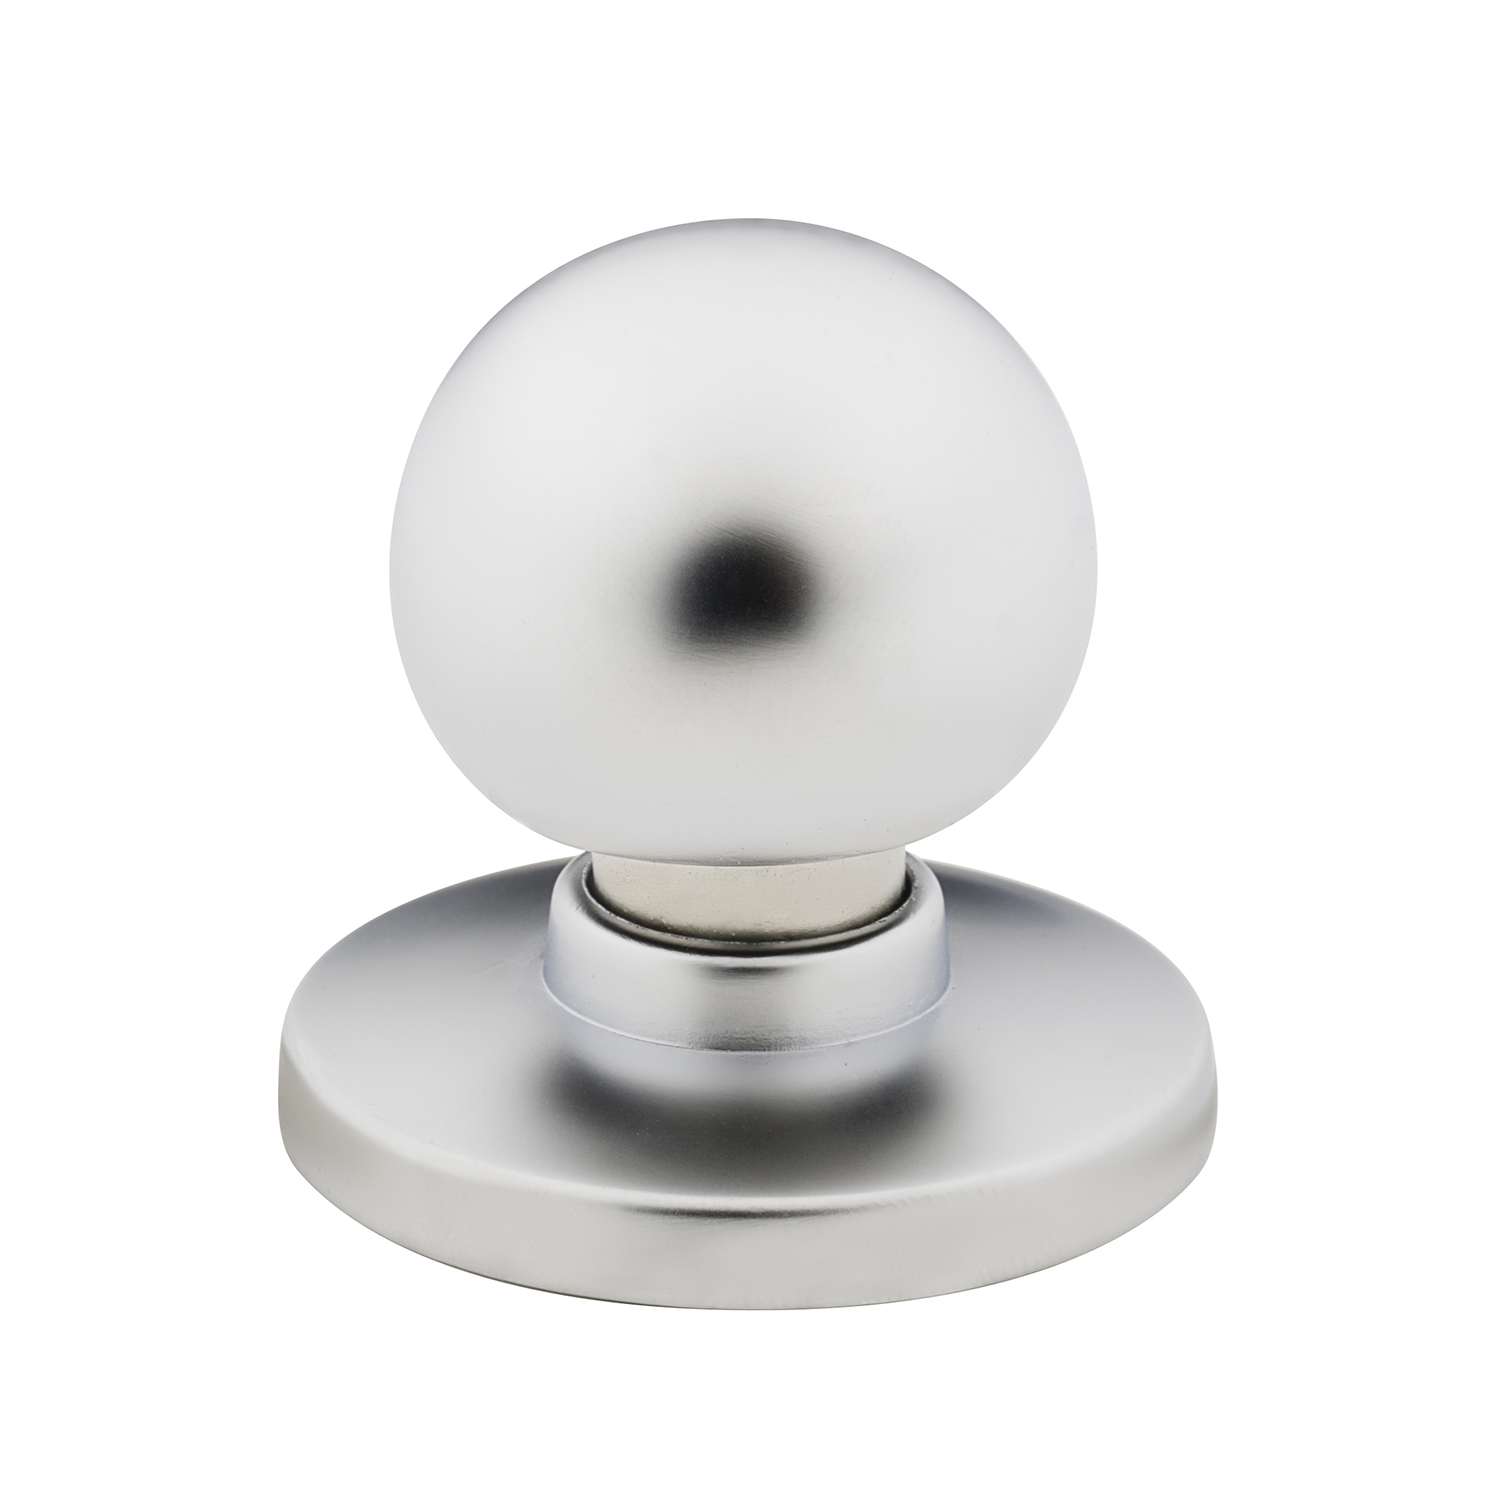 Cabinet Knobs - Pedestal Knob with Removable Backplate - Pedestal Knob with Removable Backplate - Dull Chrome